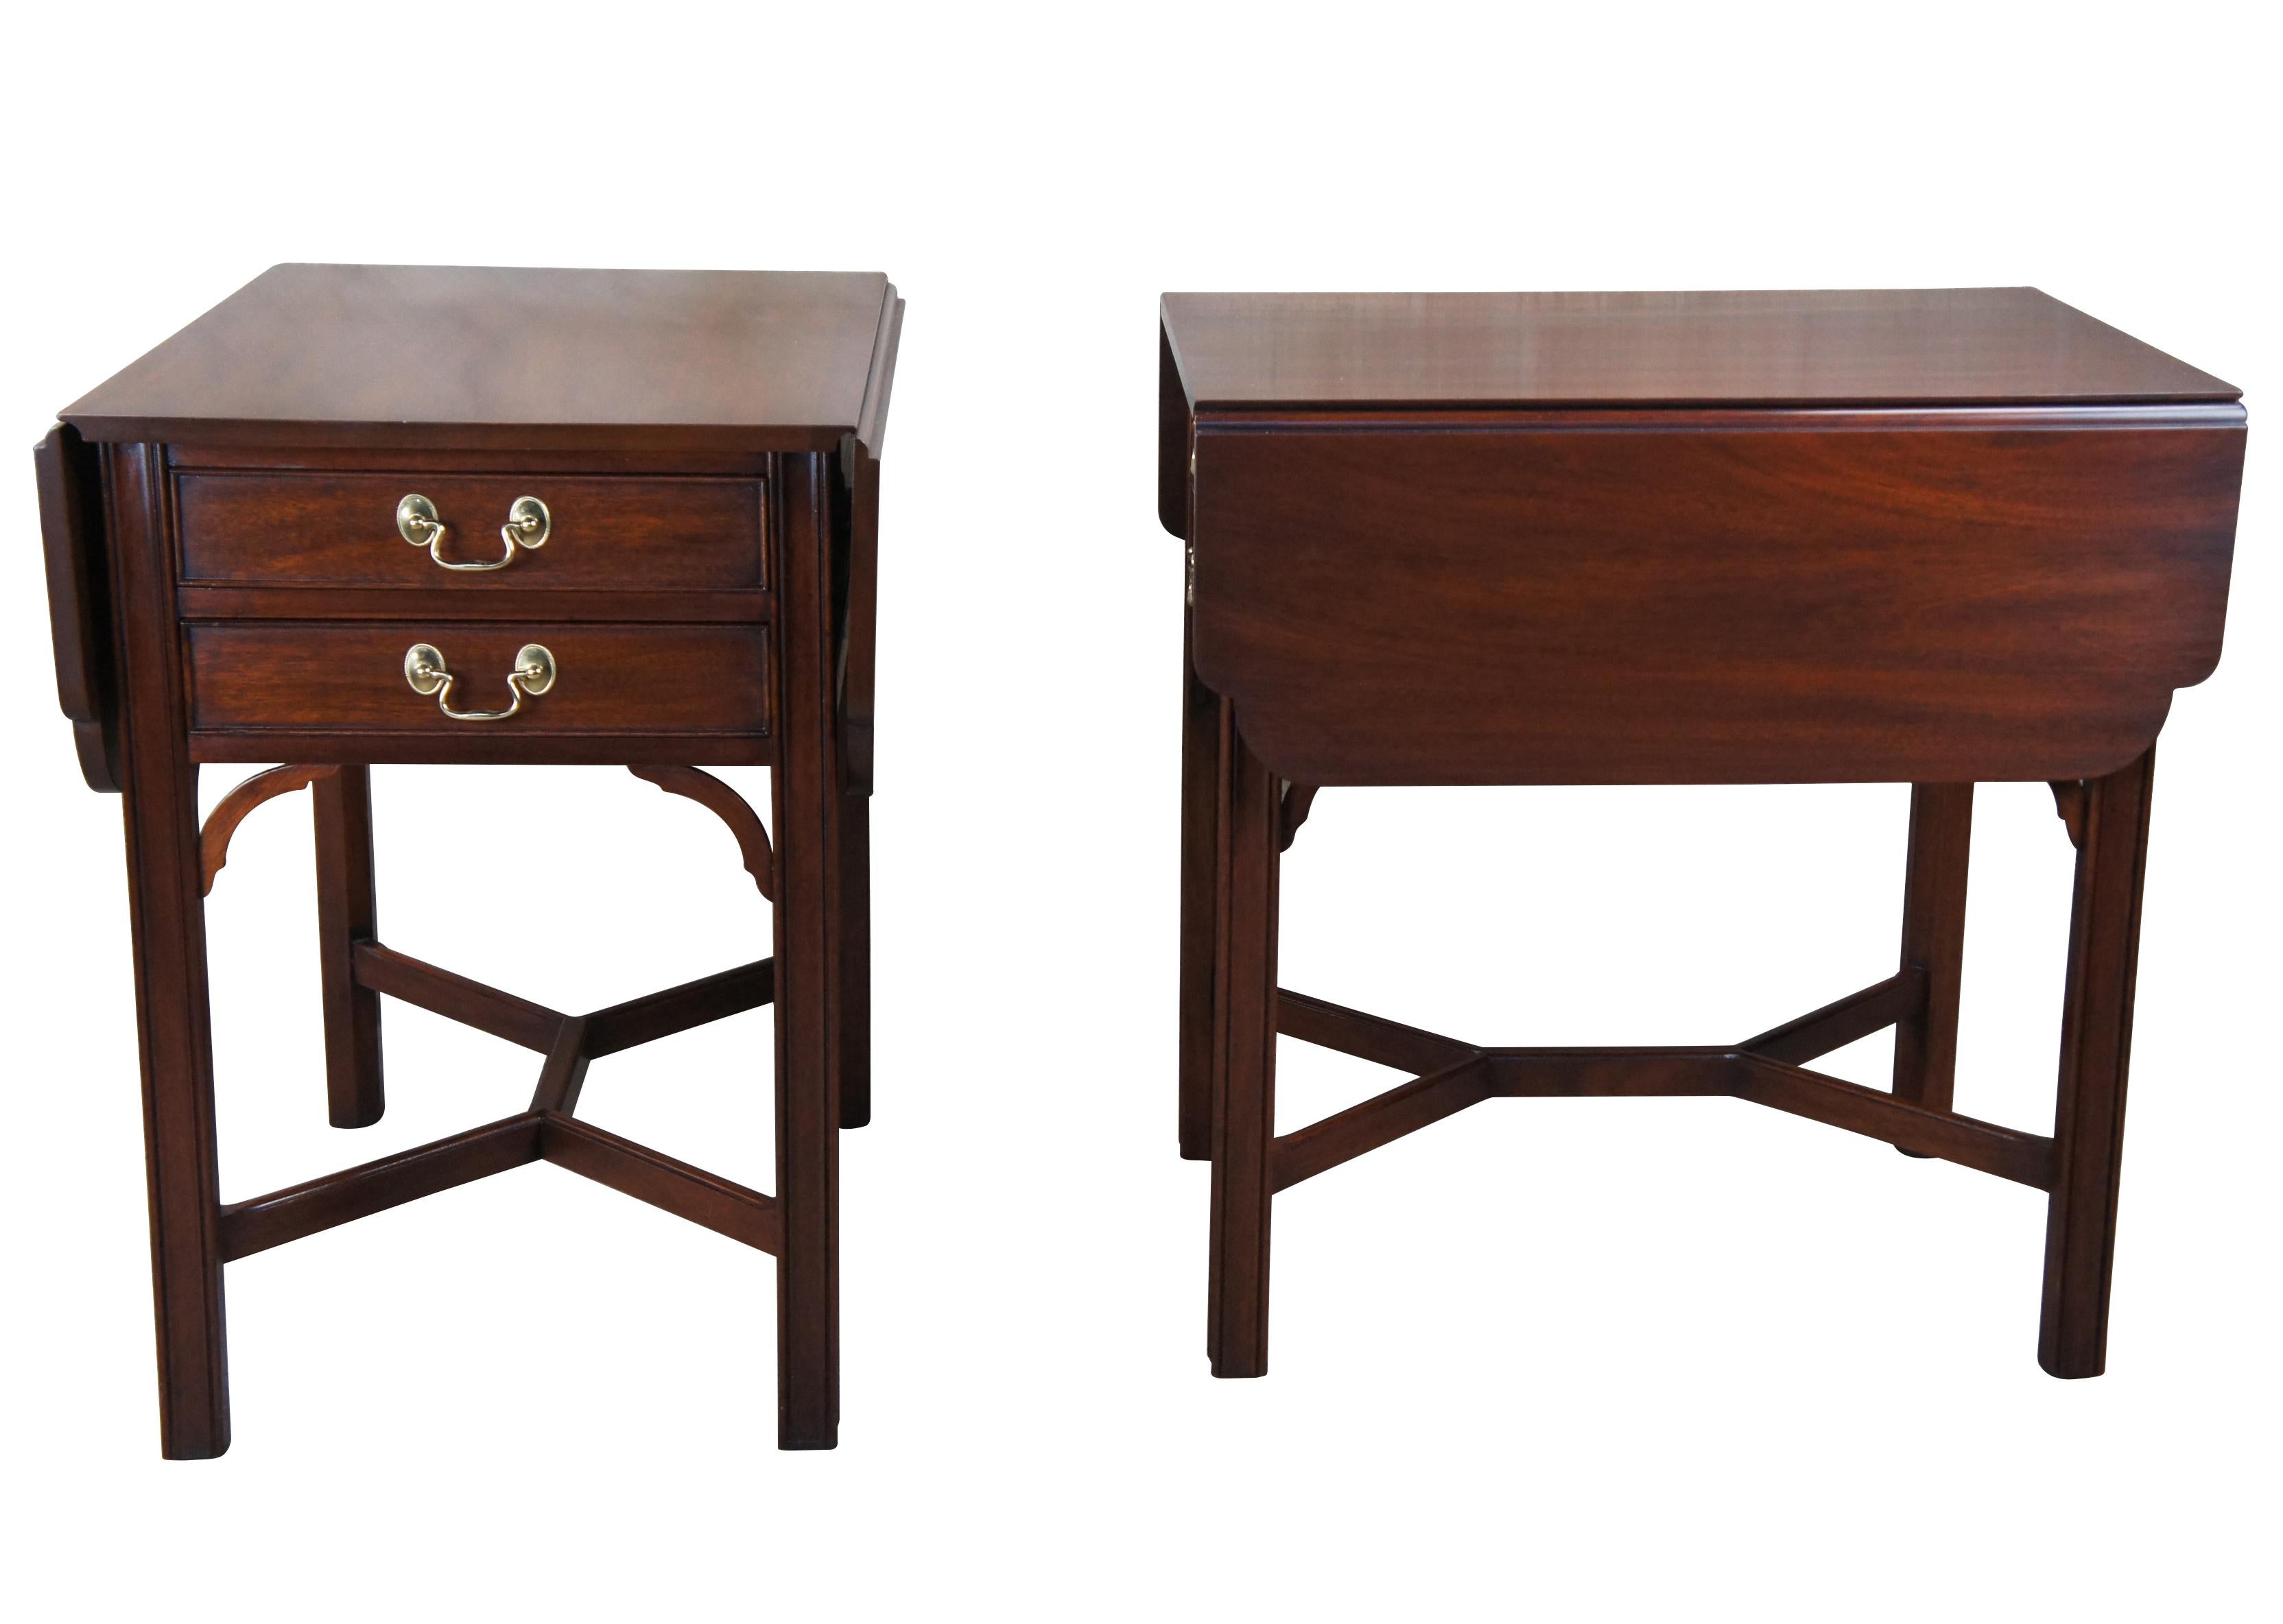 Exceptional pair of English Chippendale style Pembroke tables by Henkel Harris, circa 1988. A rectangular form made from genuine mahogany with drop leaf sides, dovetailed drawers and chamfered legs. The legs are accented by contoured spandrels and